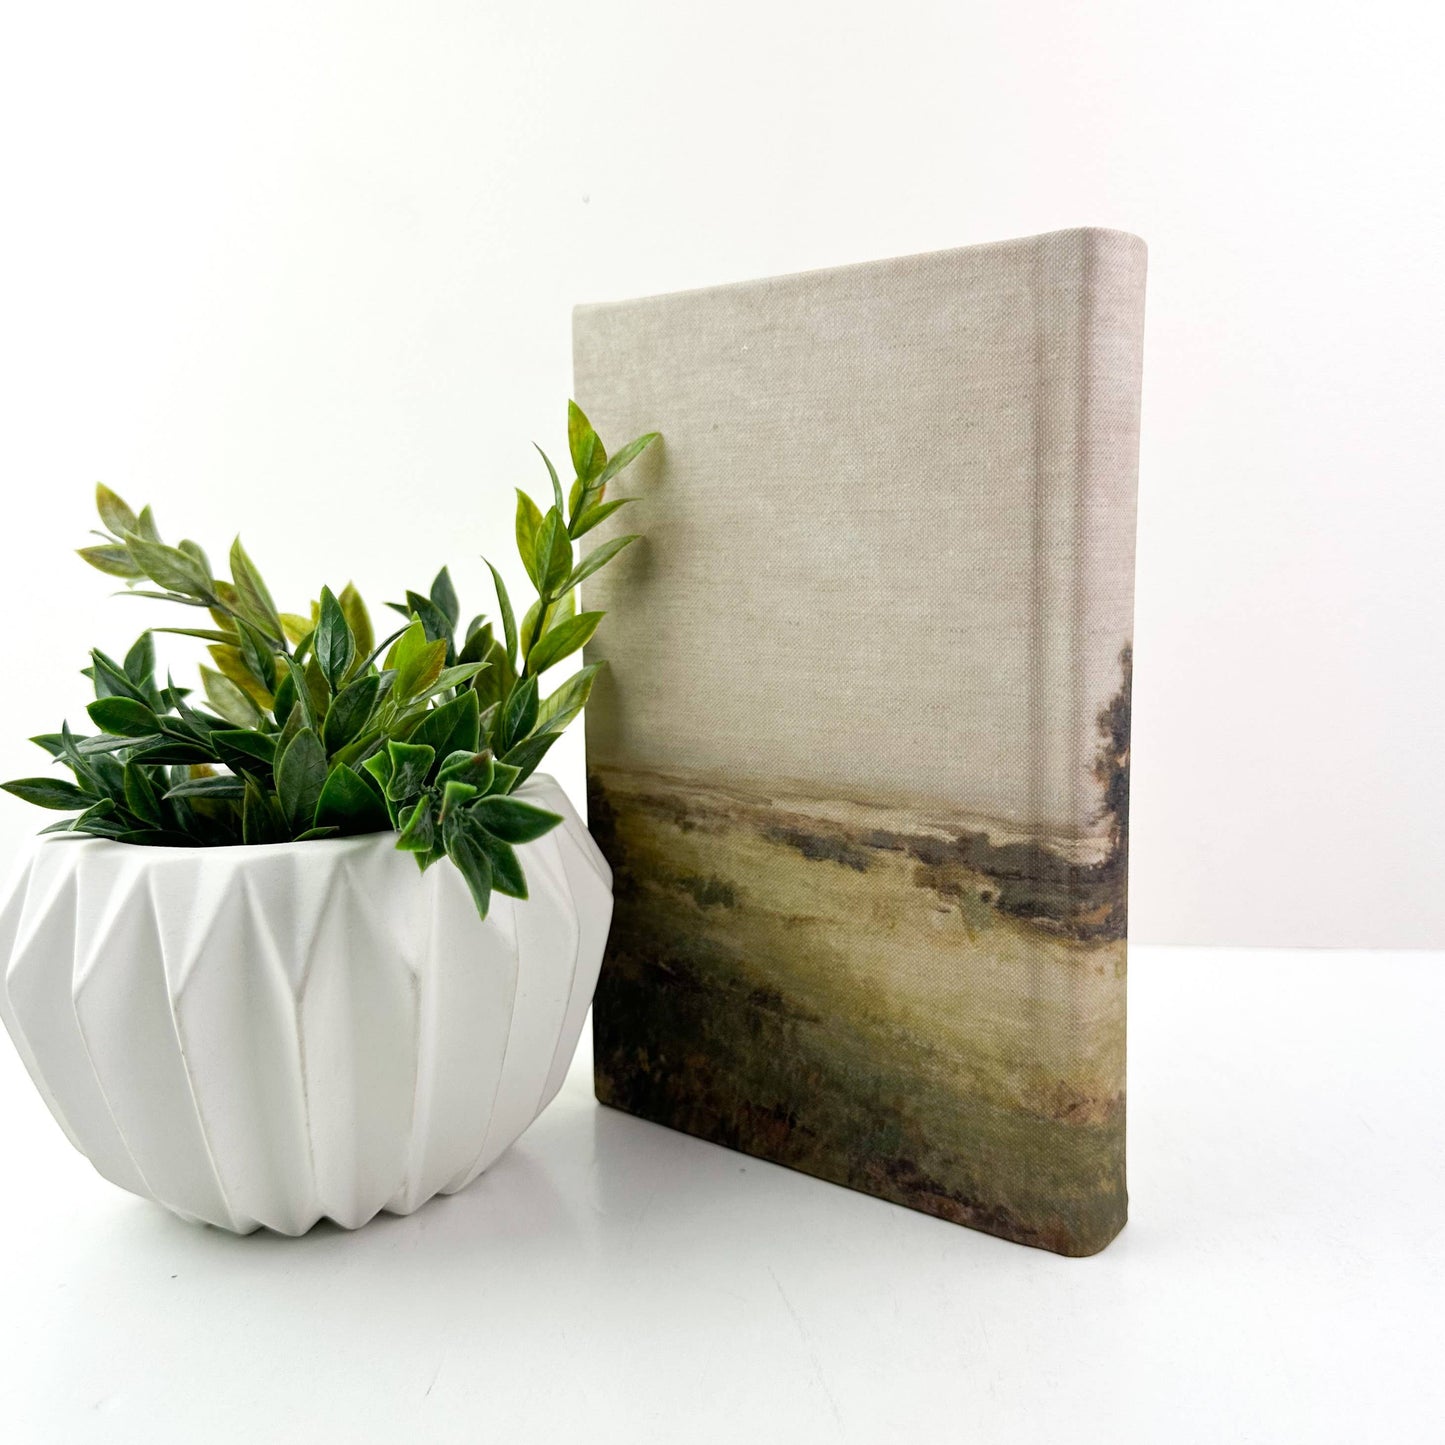 Wrapped Decorative Book with Landscape Design